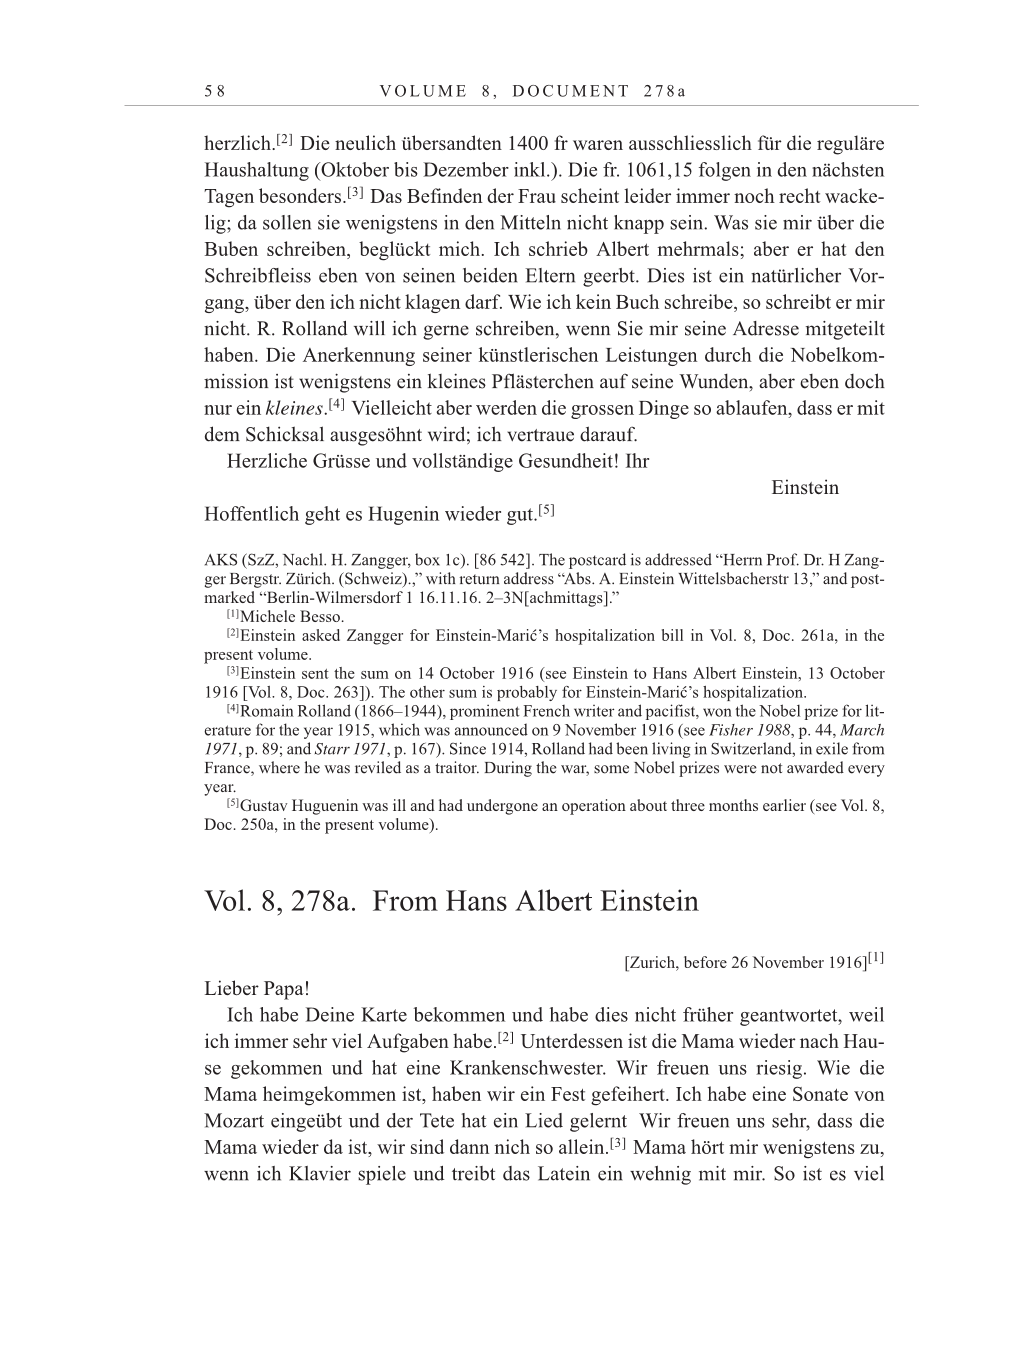 Volume 10: The Berlin Years: Correspondence May-December 1920 / Supplementary Correspondence 1909-1920 page 58